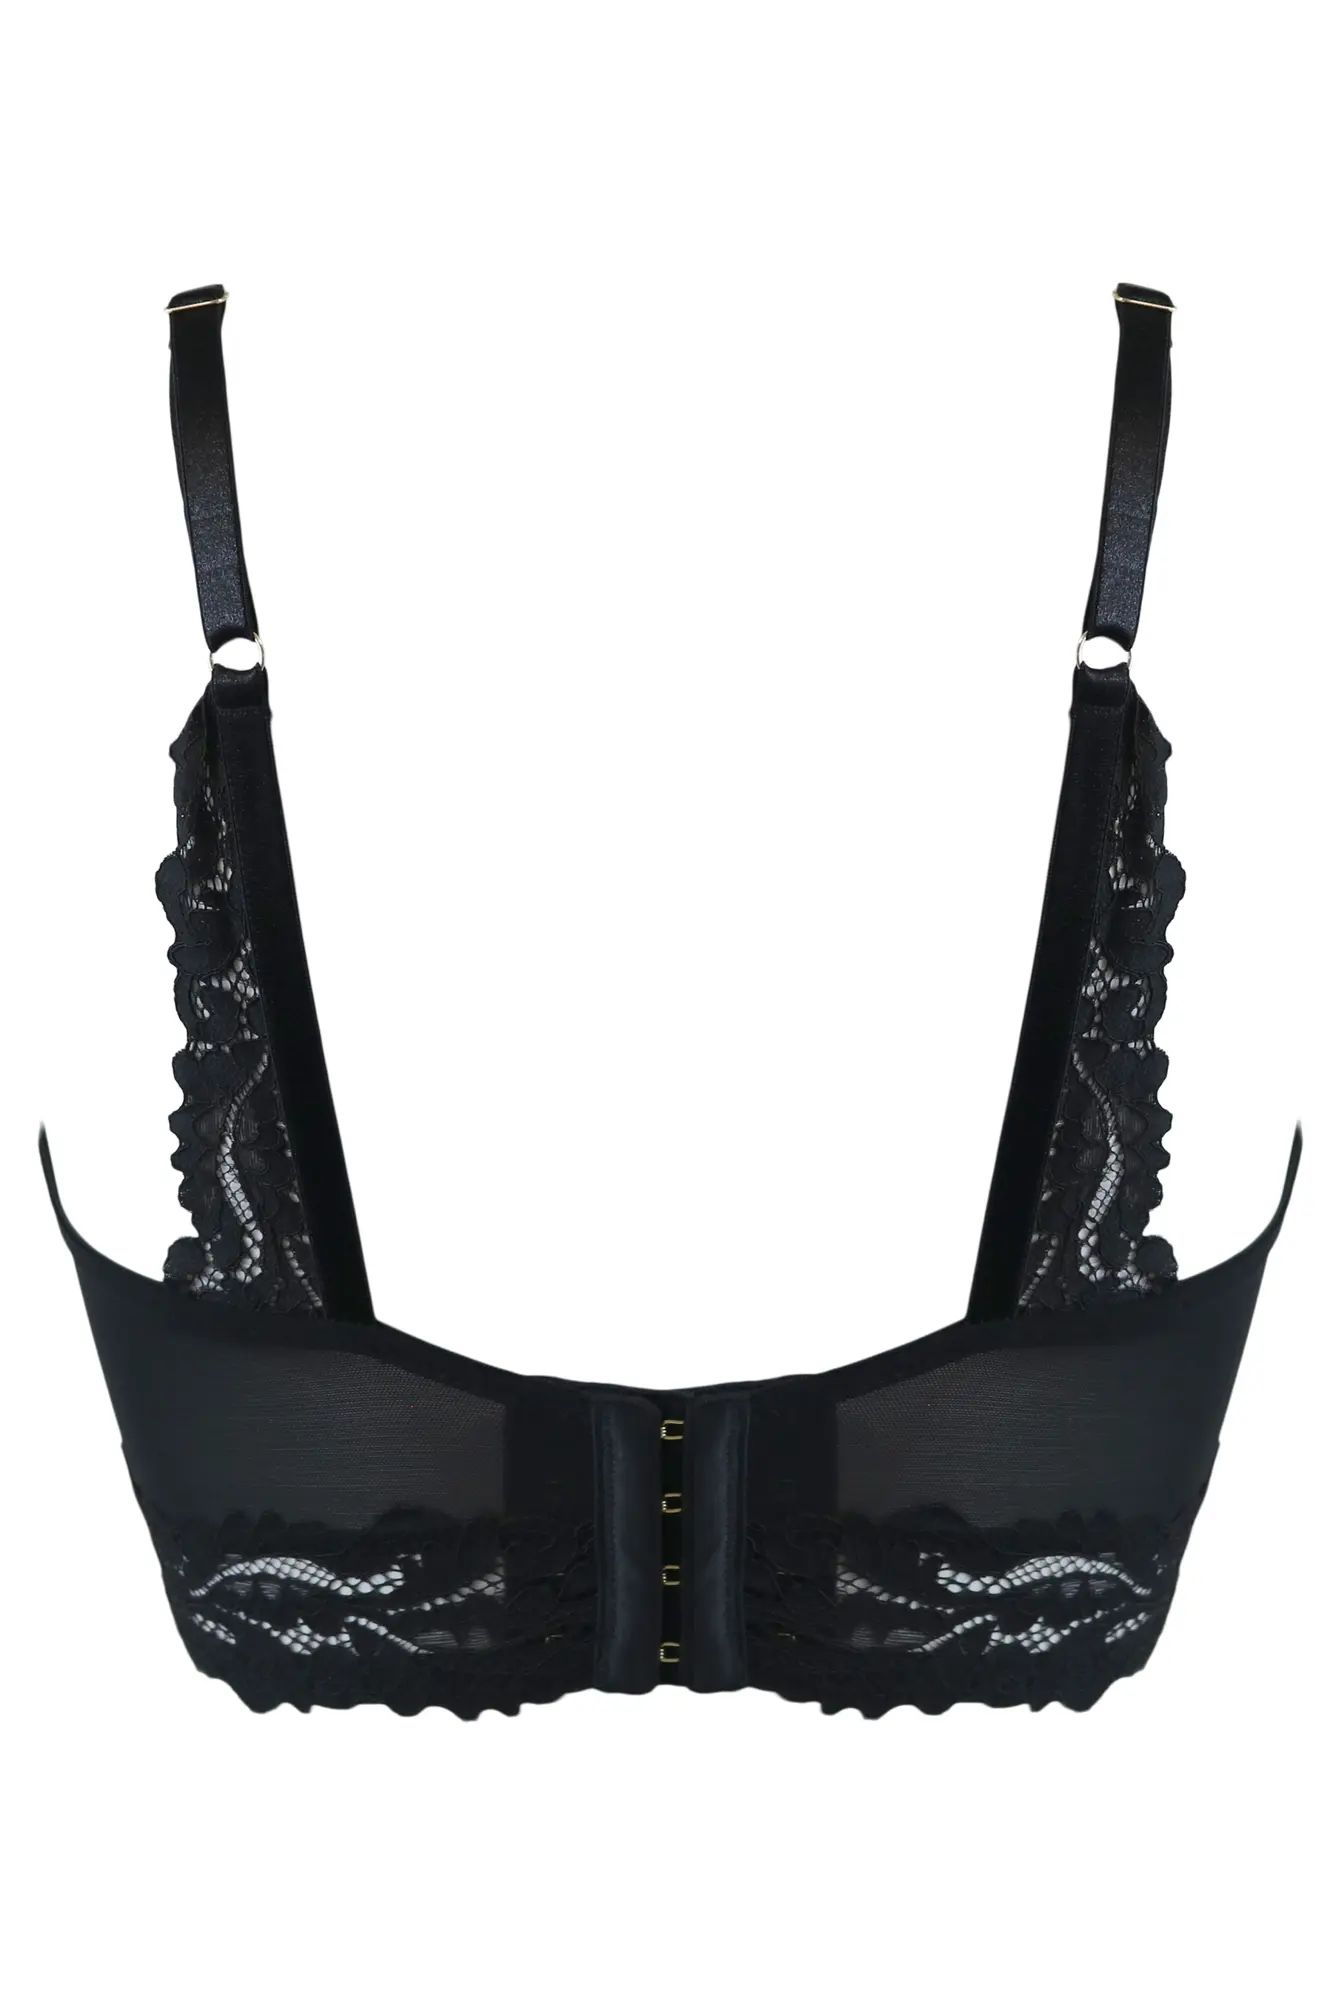 India Lace and Mesh Underwired Bustier | Black | Pour Moi